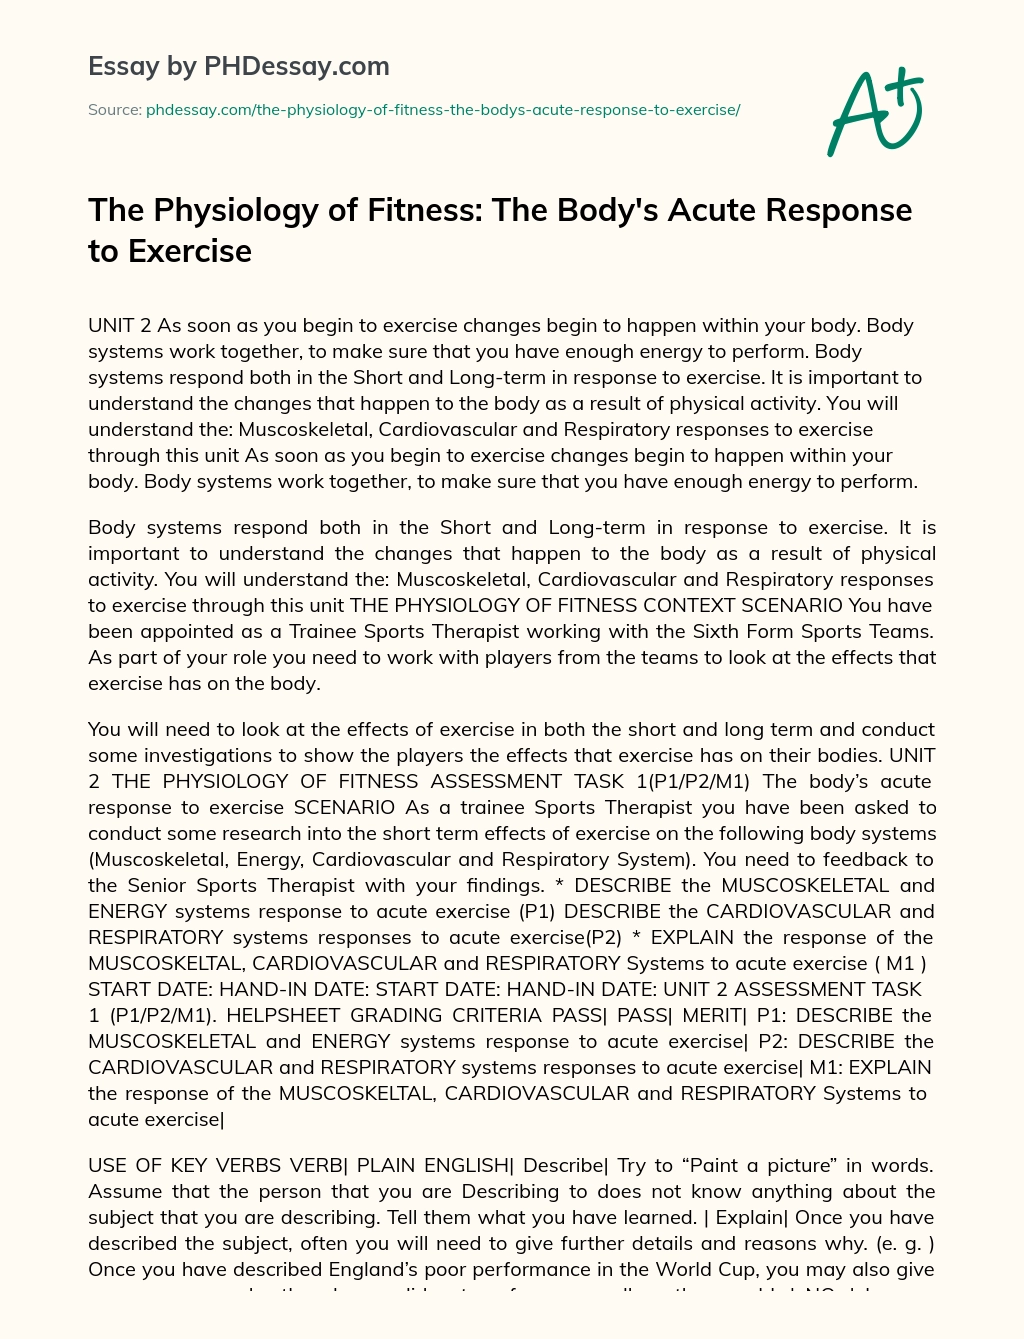 The Physiology of Fitness: The Body’s Acute Response to Exercise essay